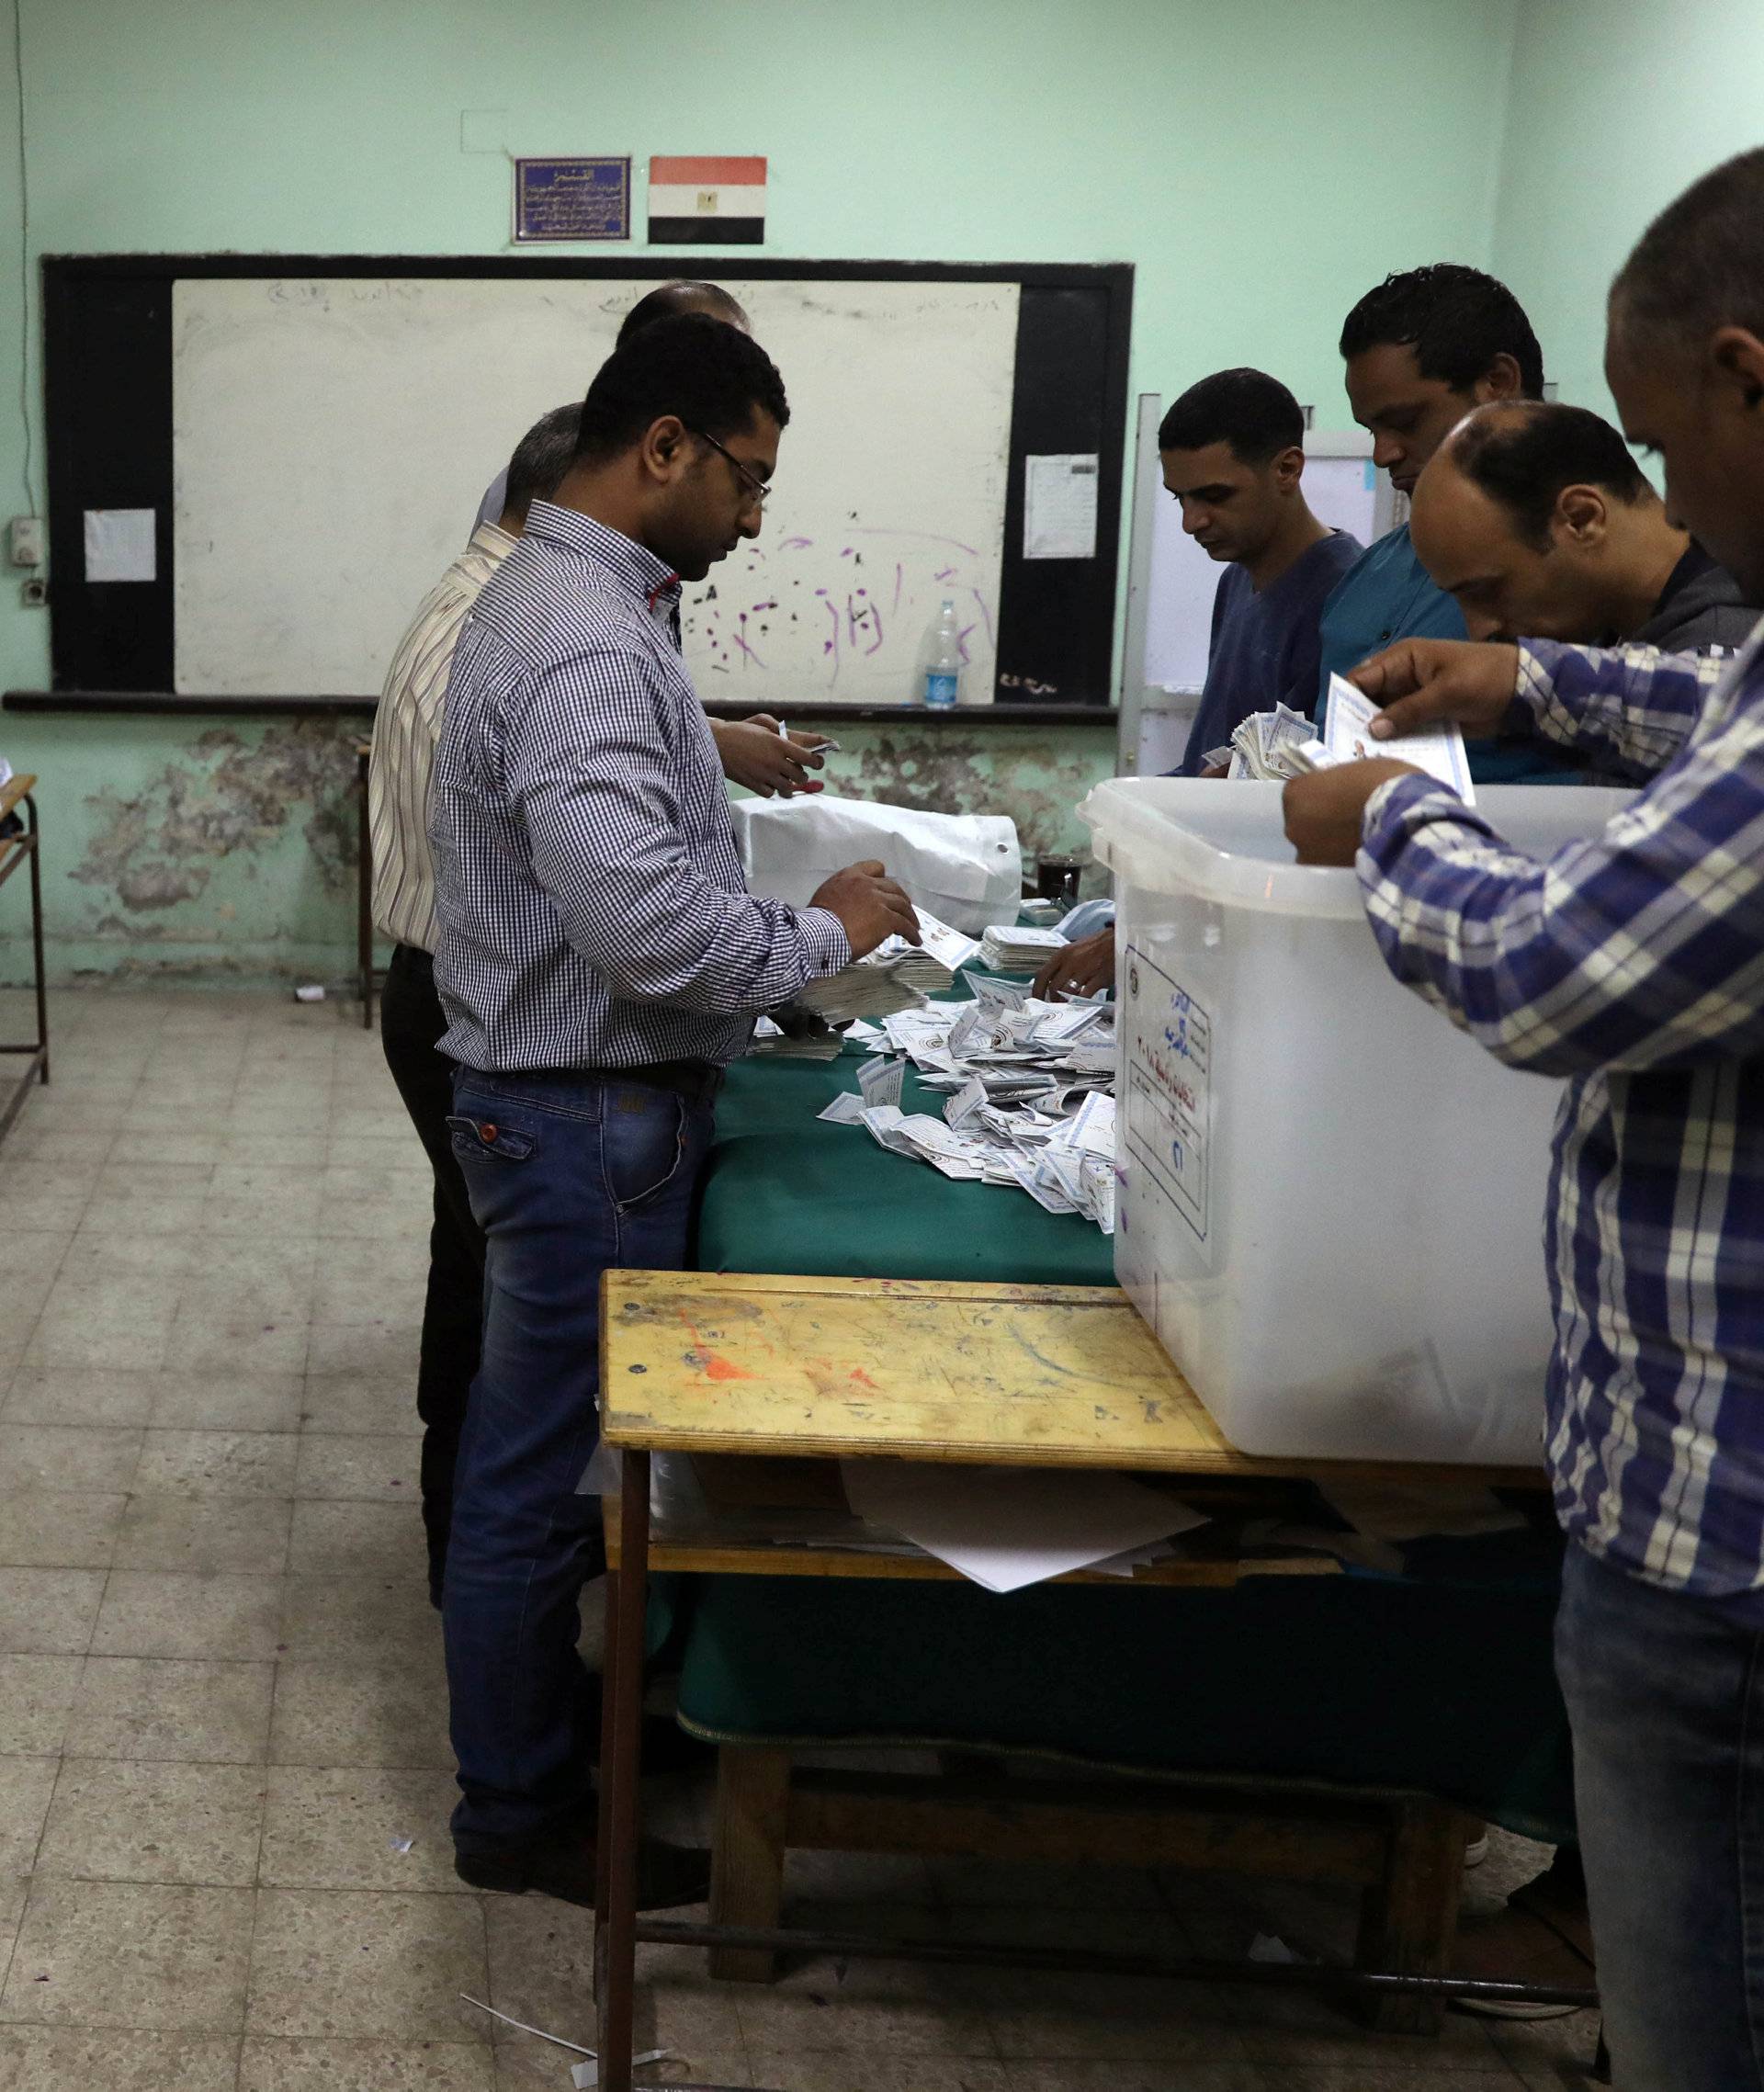 Electoral workers sort ballots to count votes after polls closed during the presidential election in Cairo